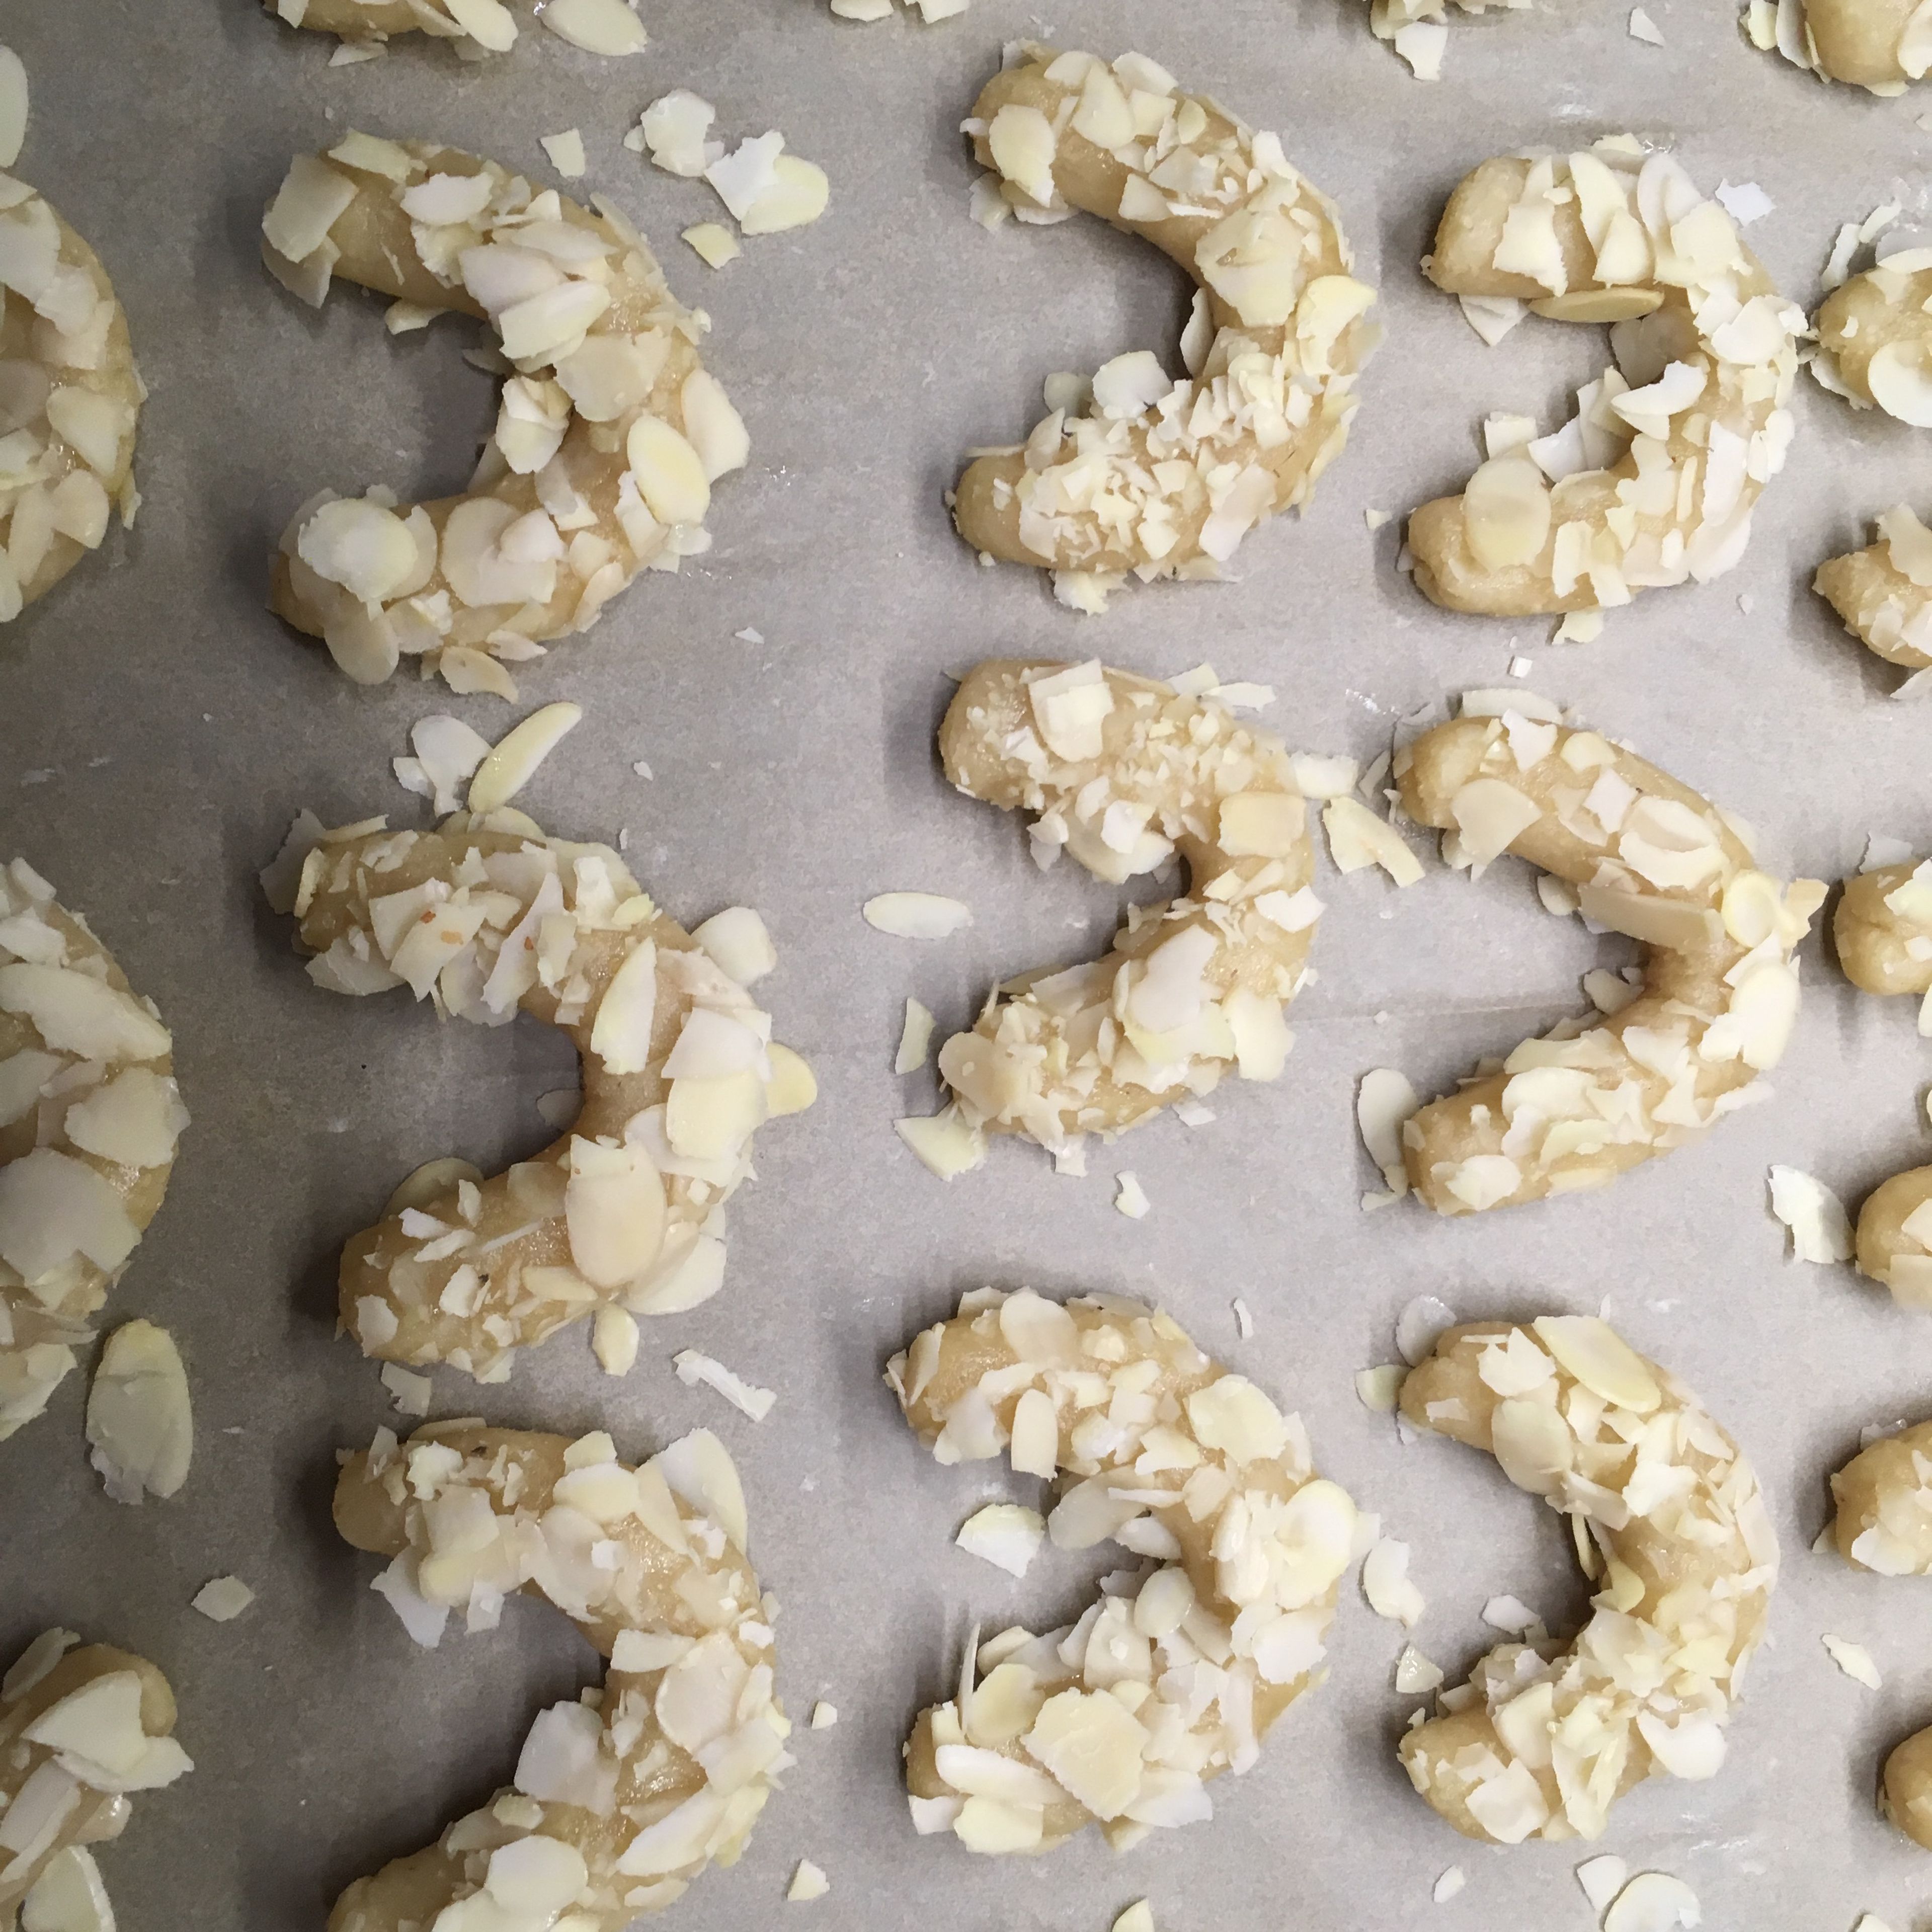 Brush each of the croissants with egg white and press into the sliced almonds. I crush the almond flakes so they stick better to the little crescents. Place on a lined baking sheet.